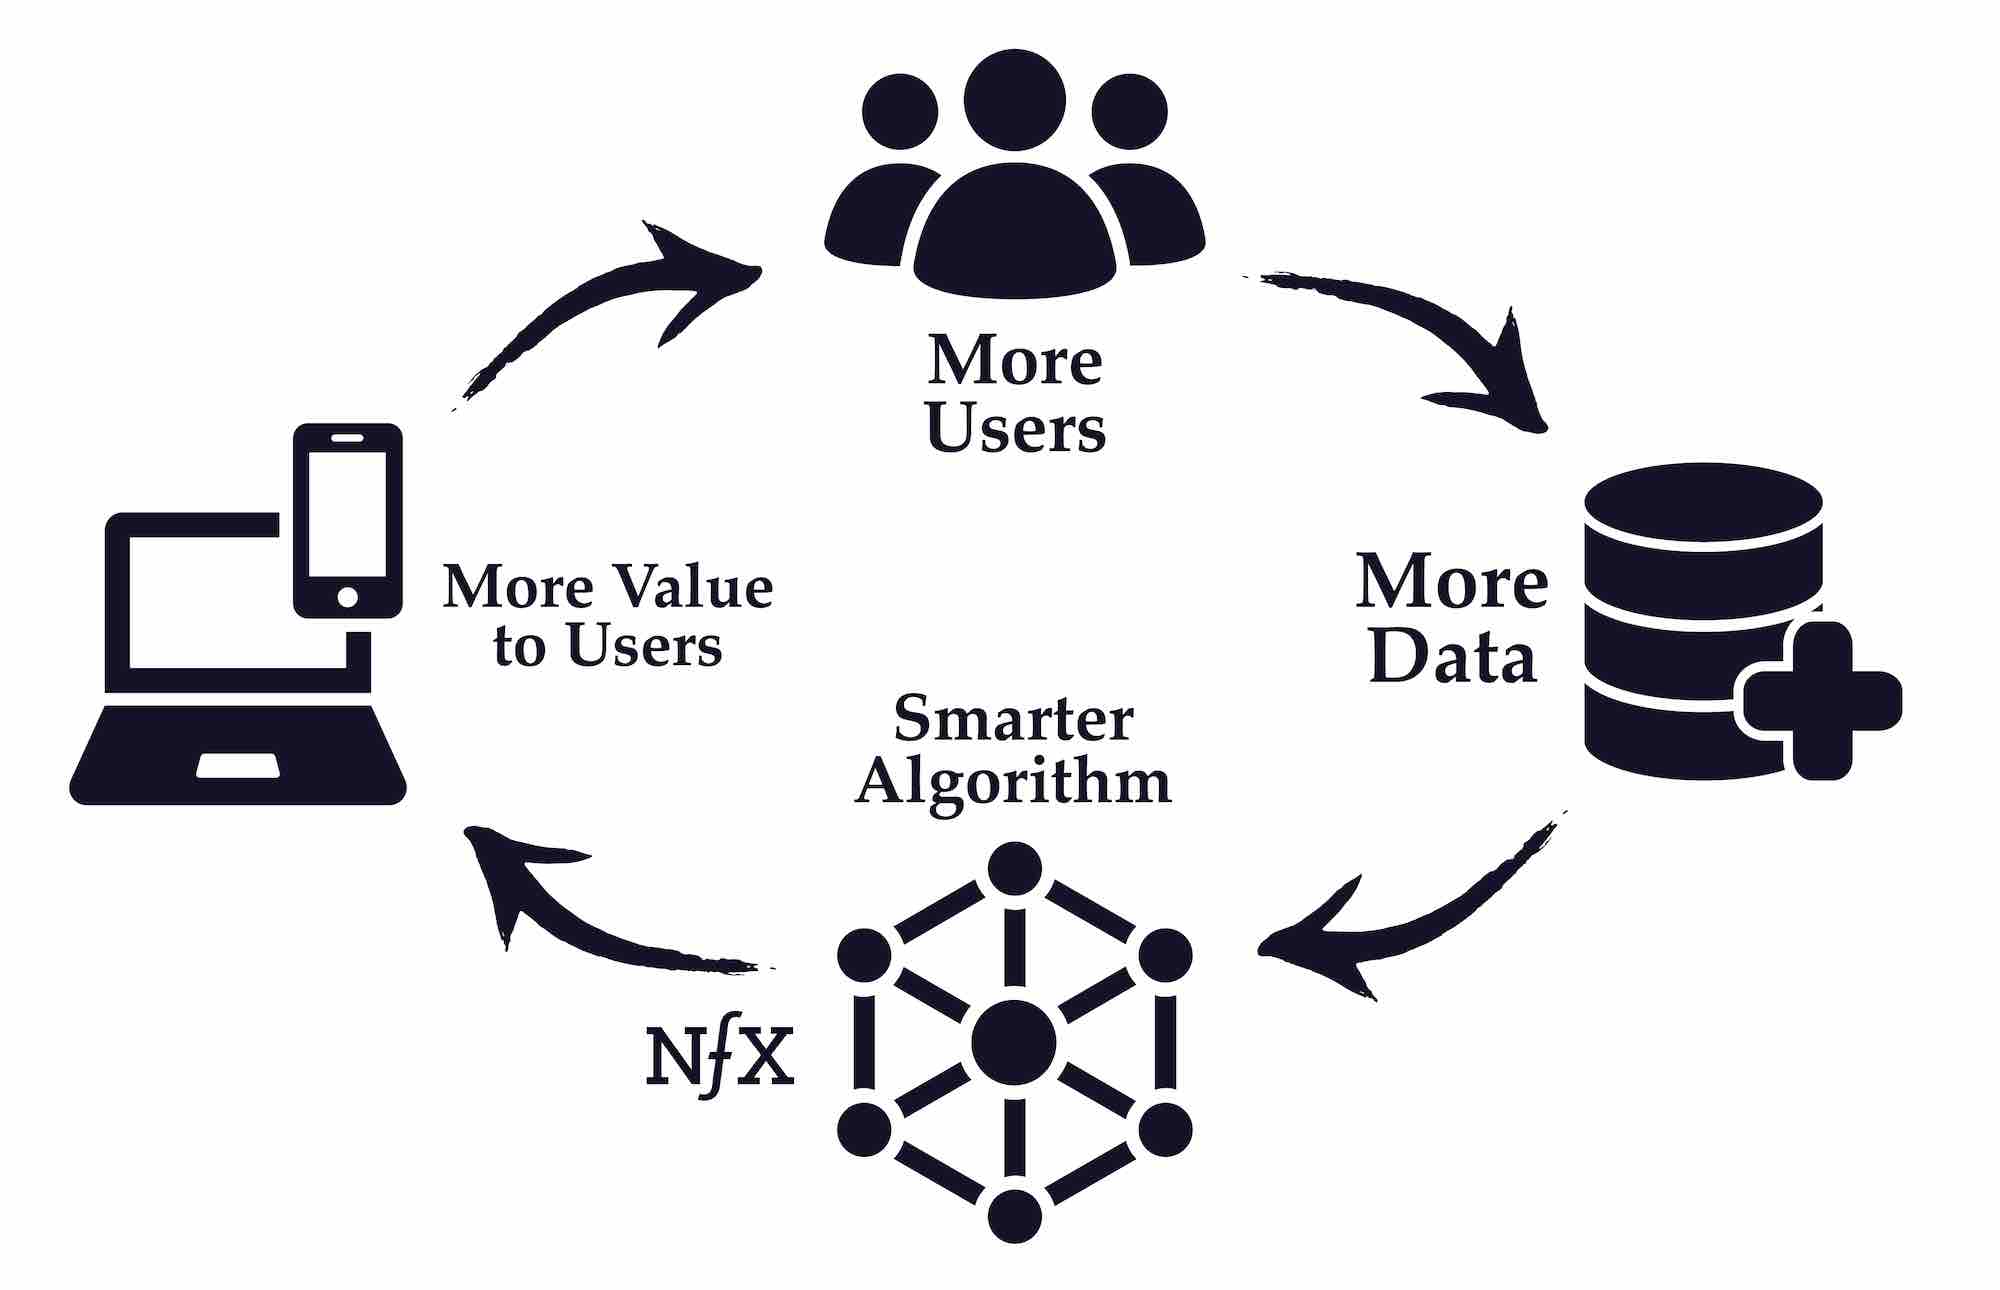 Data cycle image with more users, more data, smarter algorithm, and more value to users